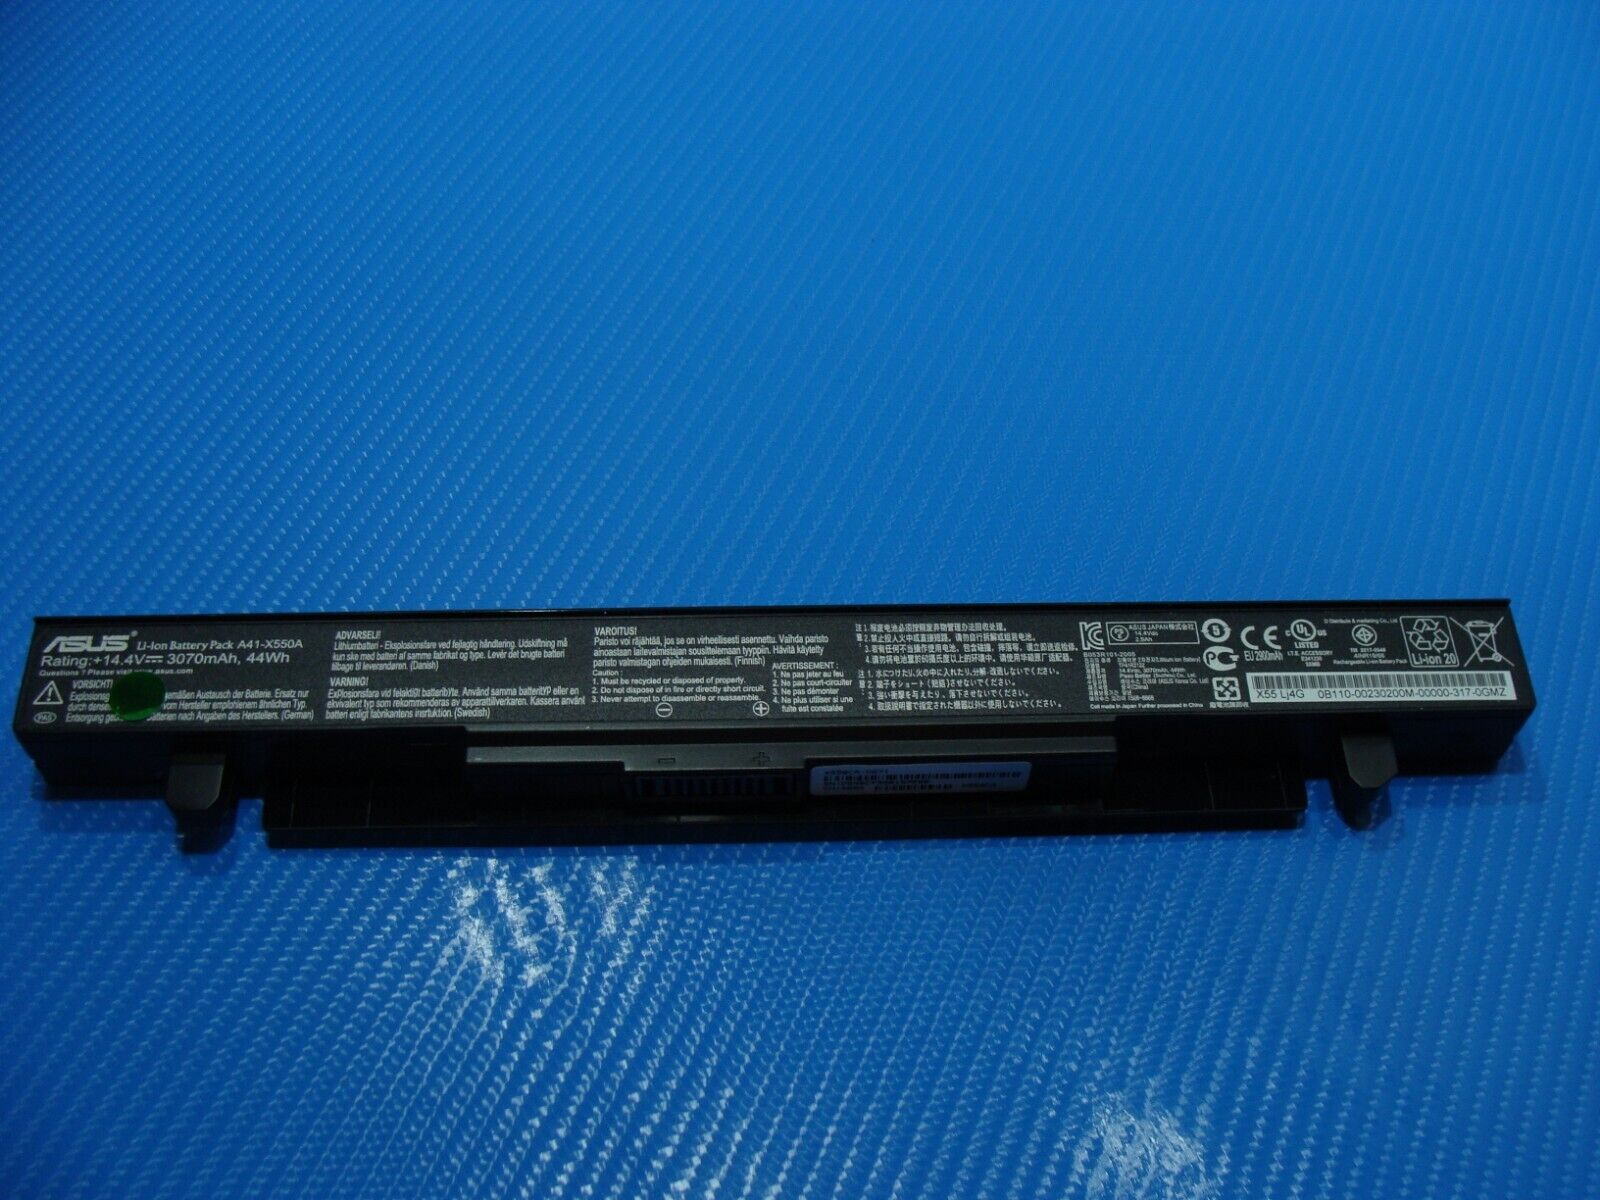 Genuine Asus A41-X550A Laptop Battery